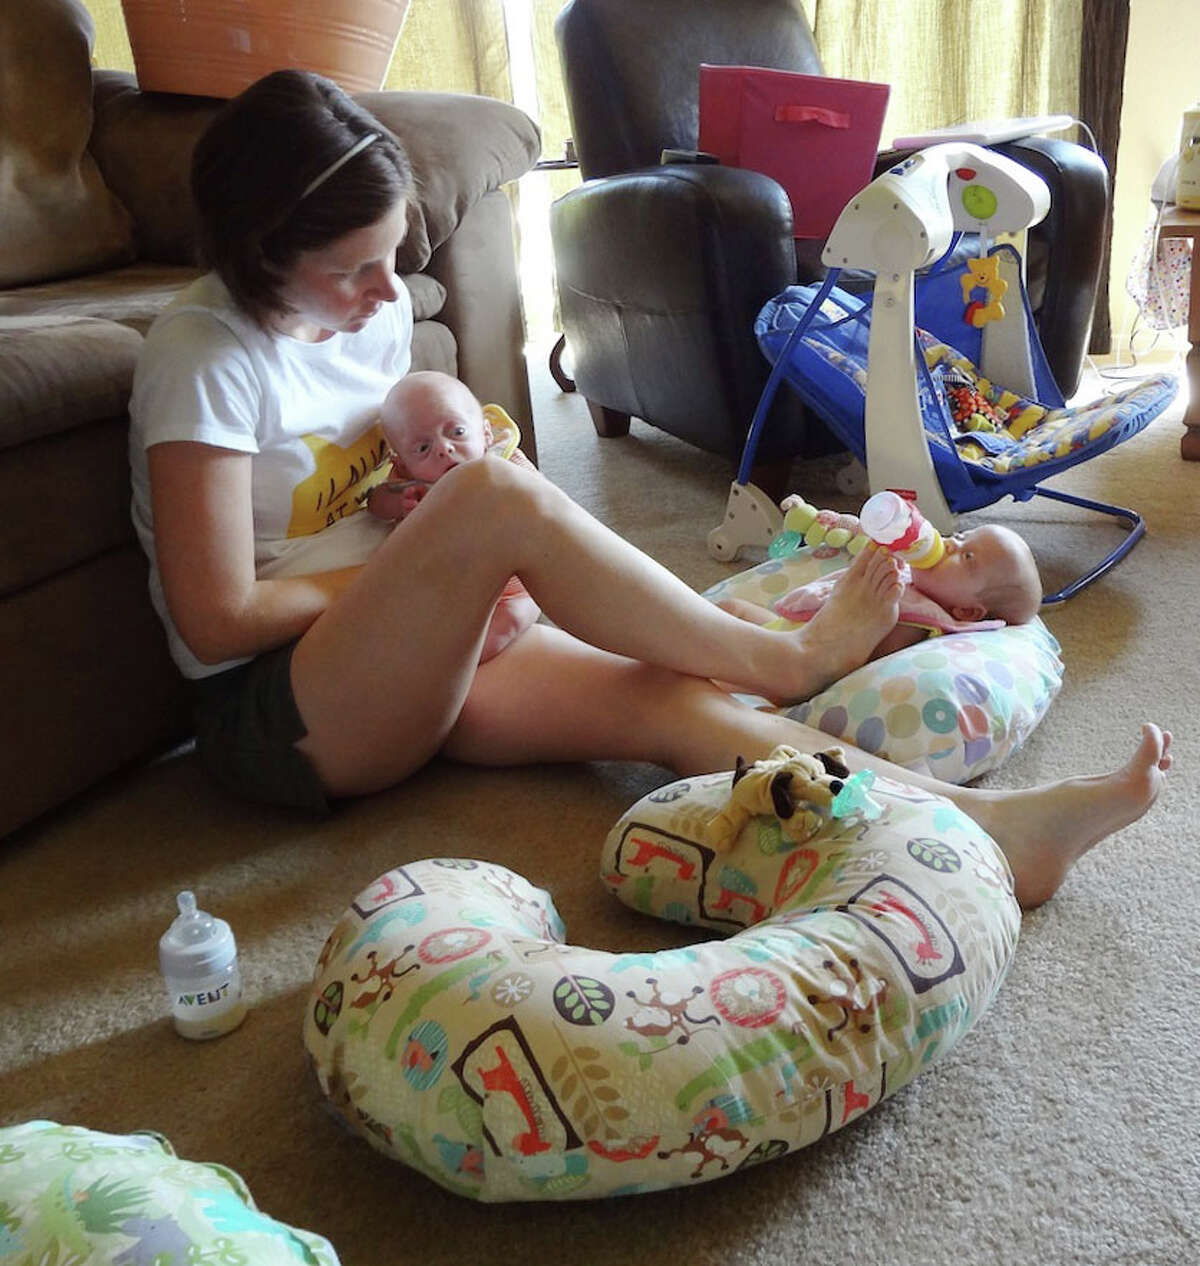 Lauren Perkins feeds Levi on her lap while balancing a bottle with her foot for Caroline. "Just take everything one day at a time," she says.